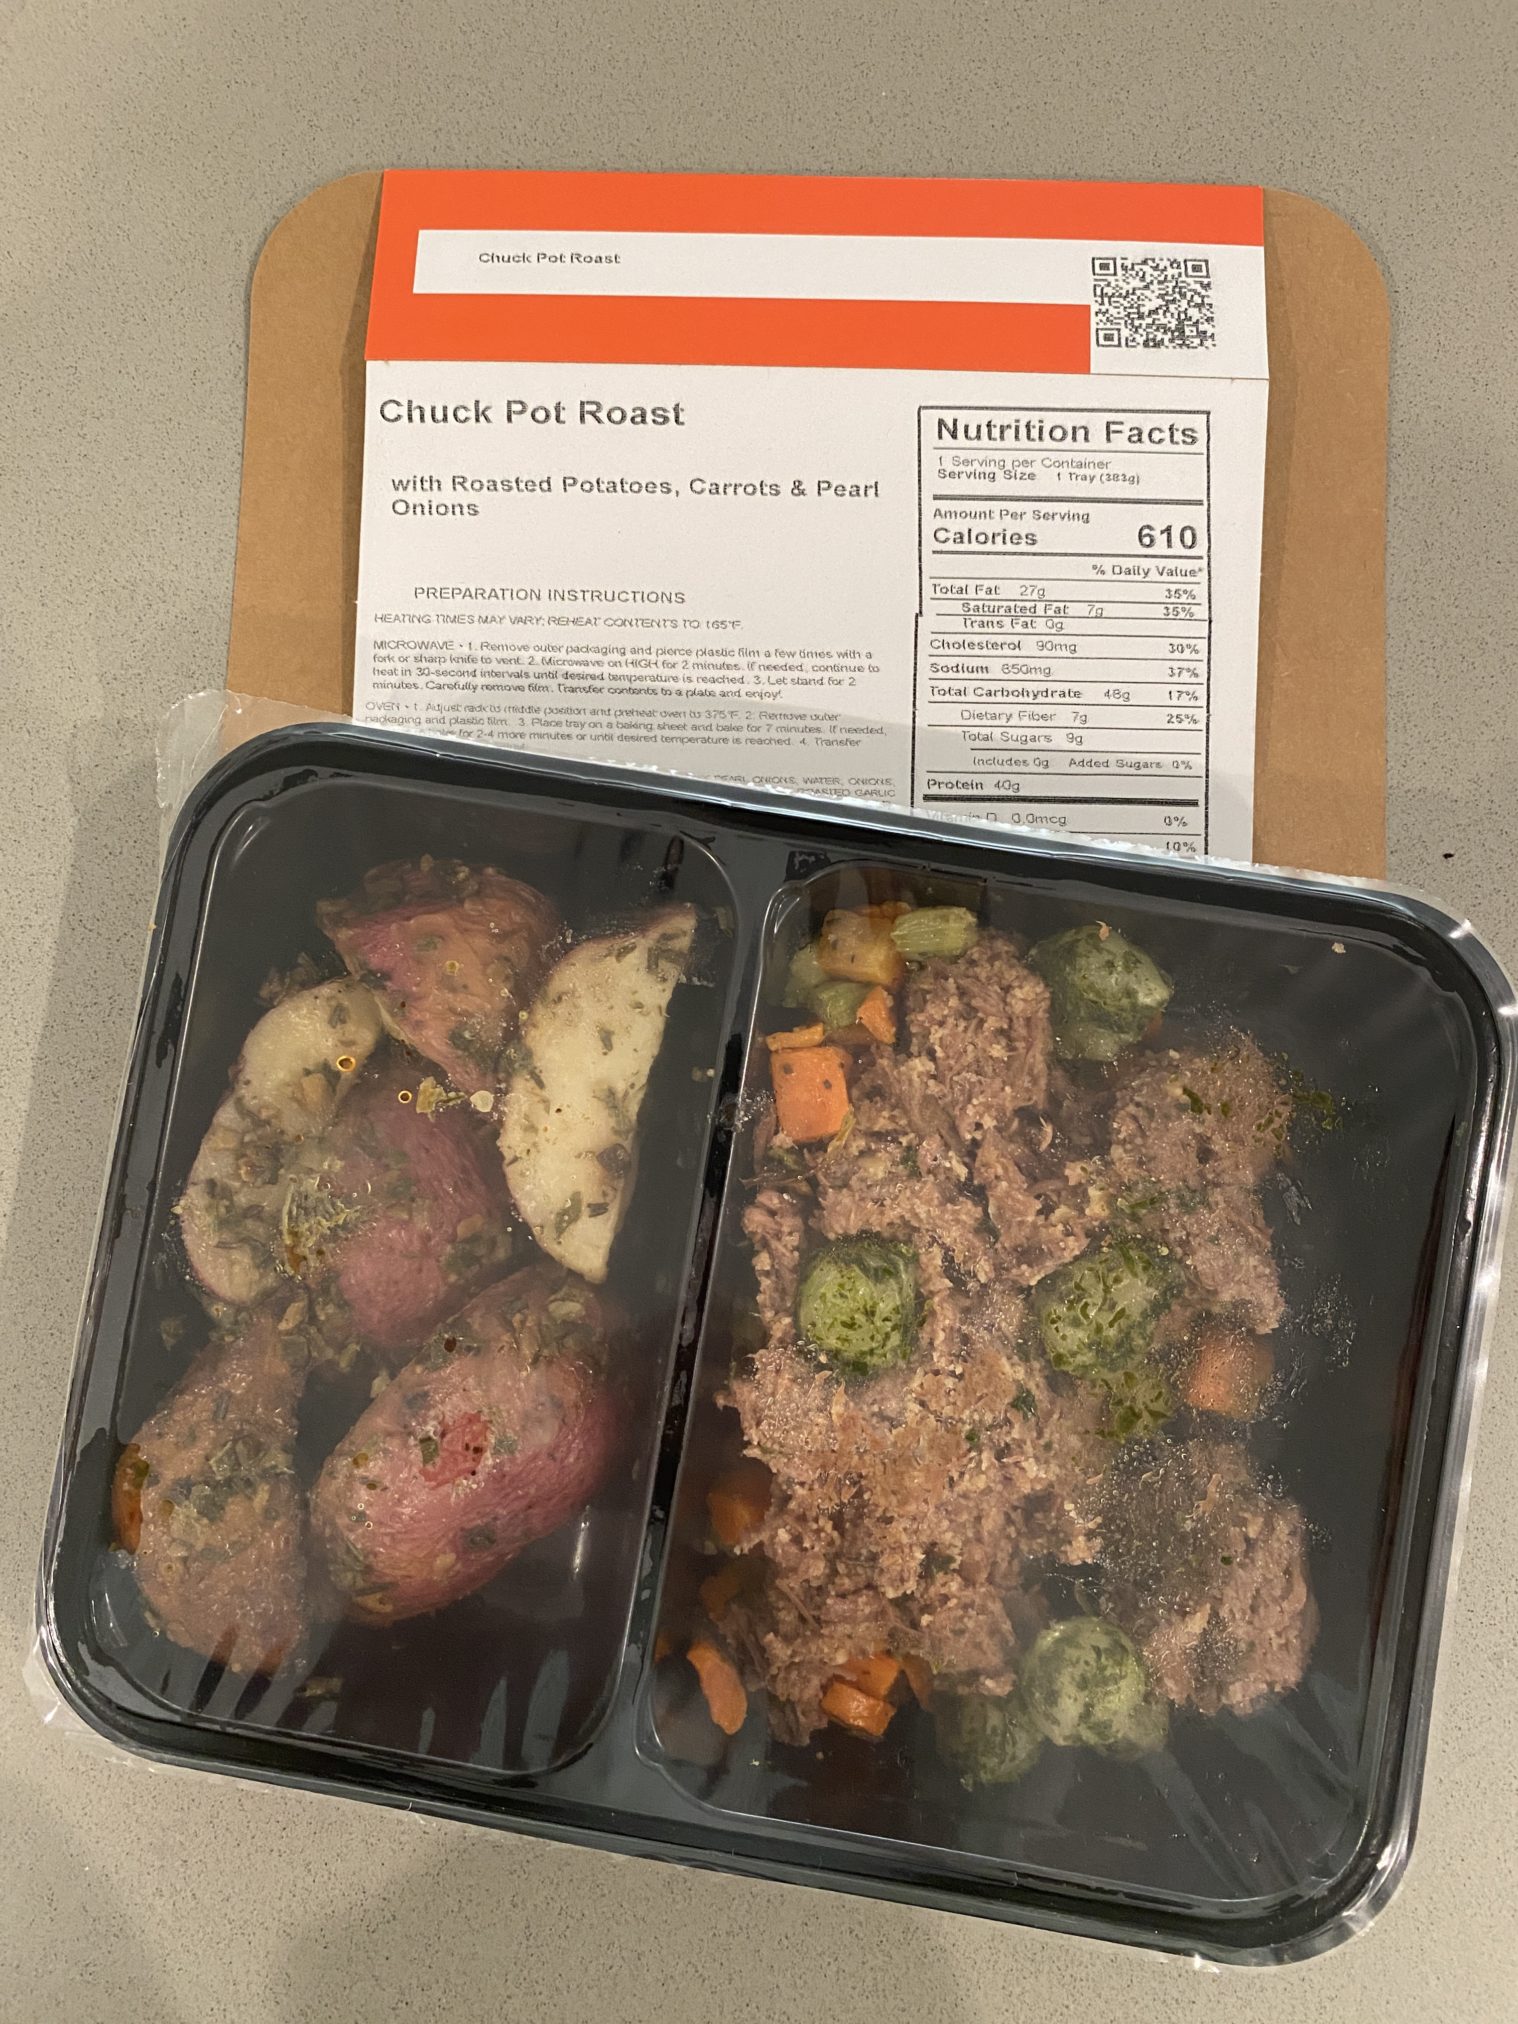 Factor 75 Types of Meals - Factor Meal Subscription Review